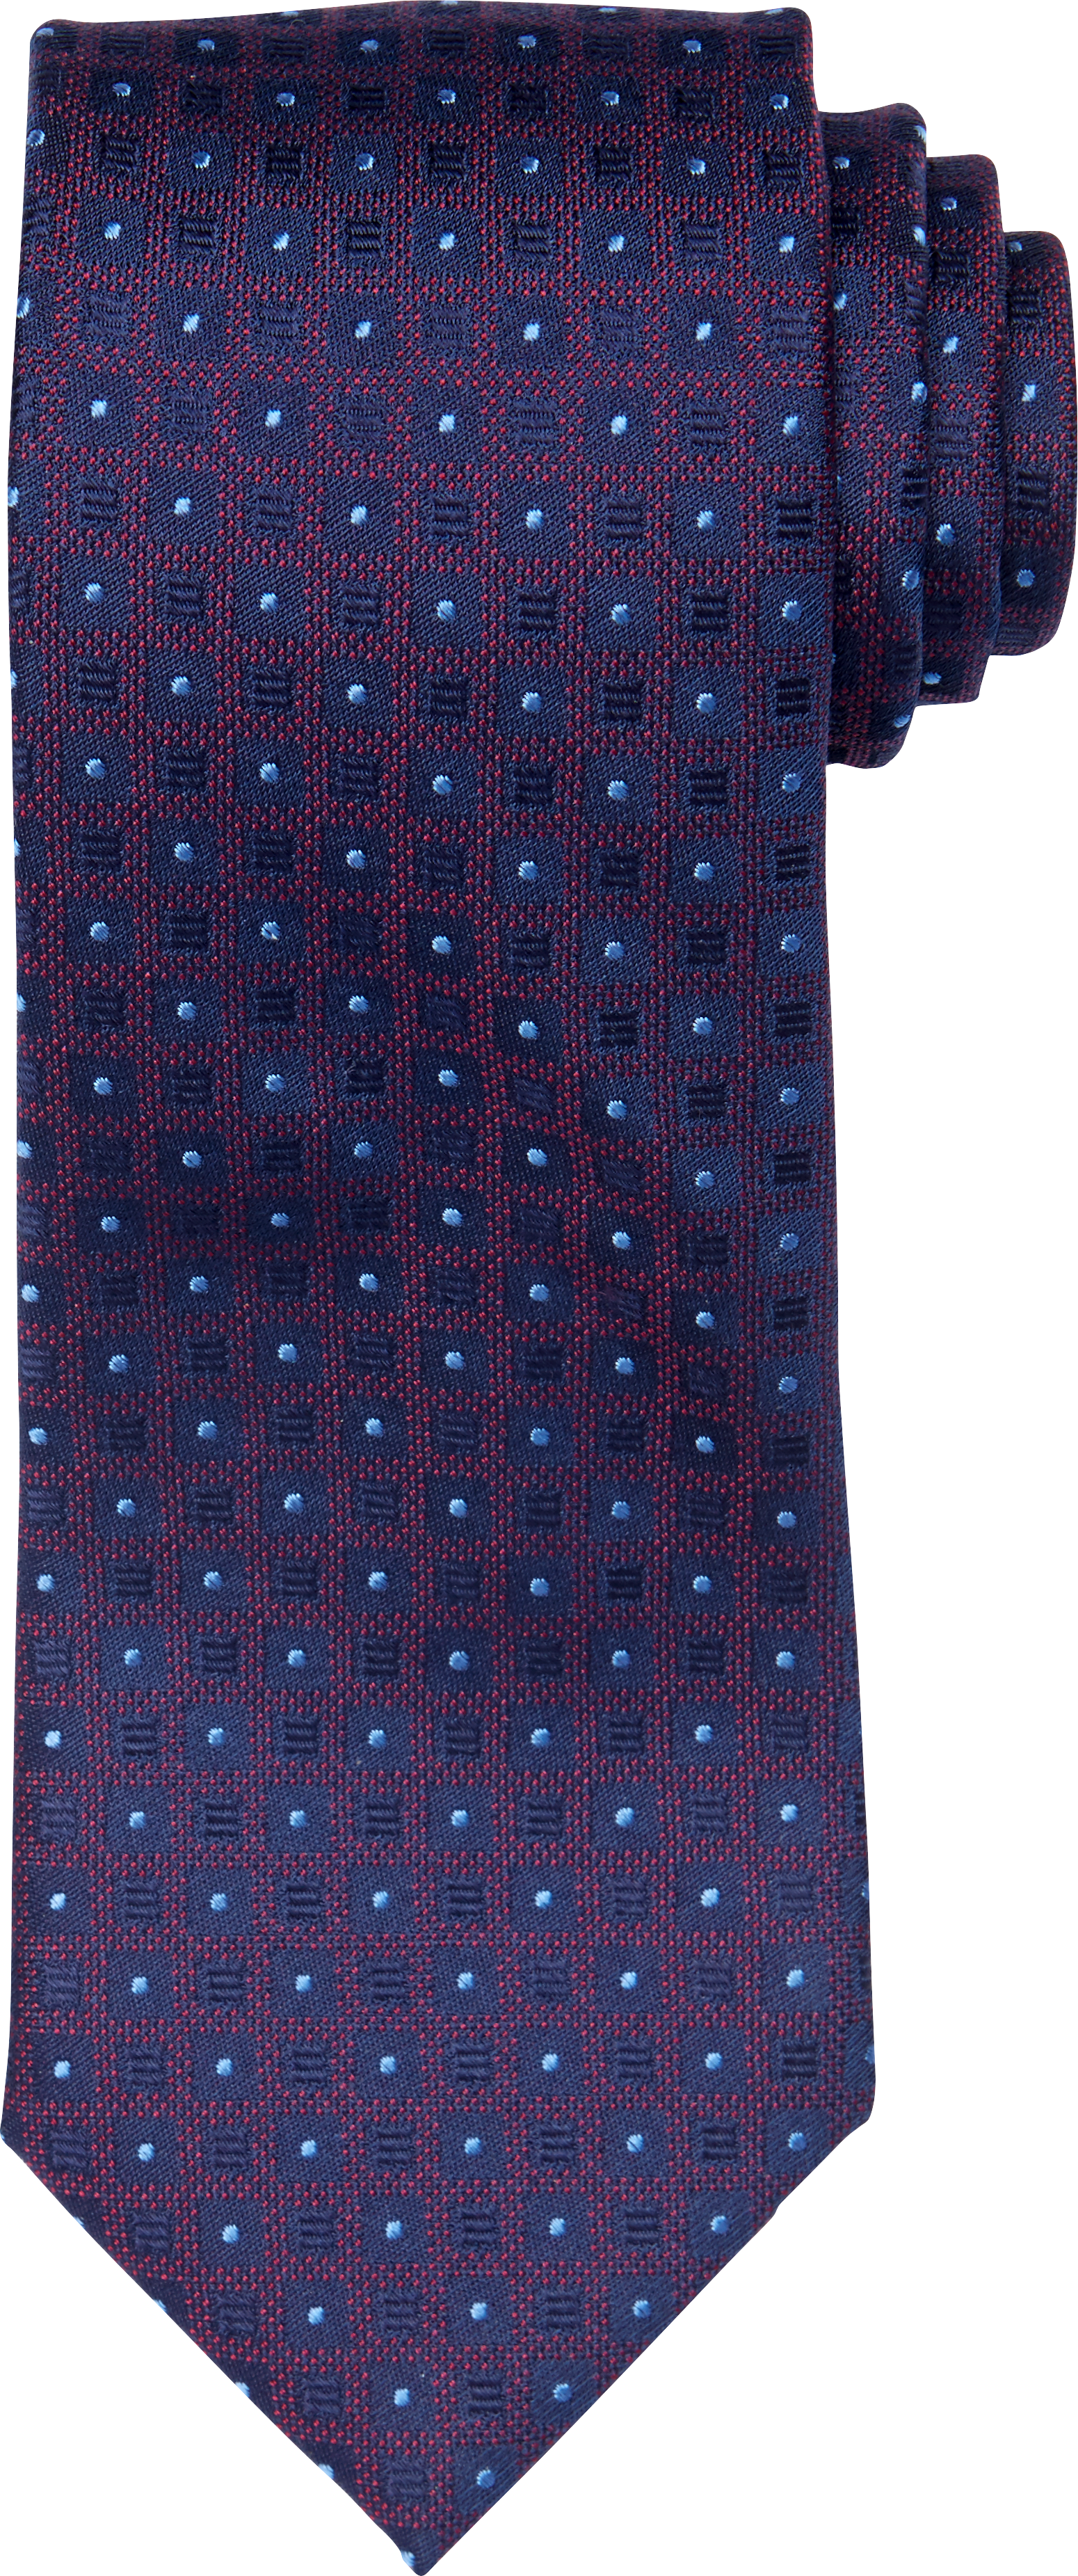 1905 Collection Micro Dot Tie - 1905 Ties | Jos A Bank